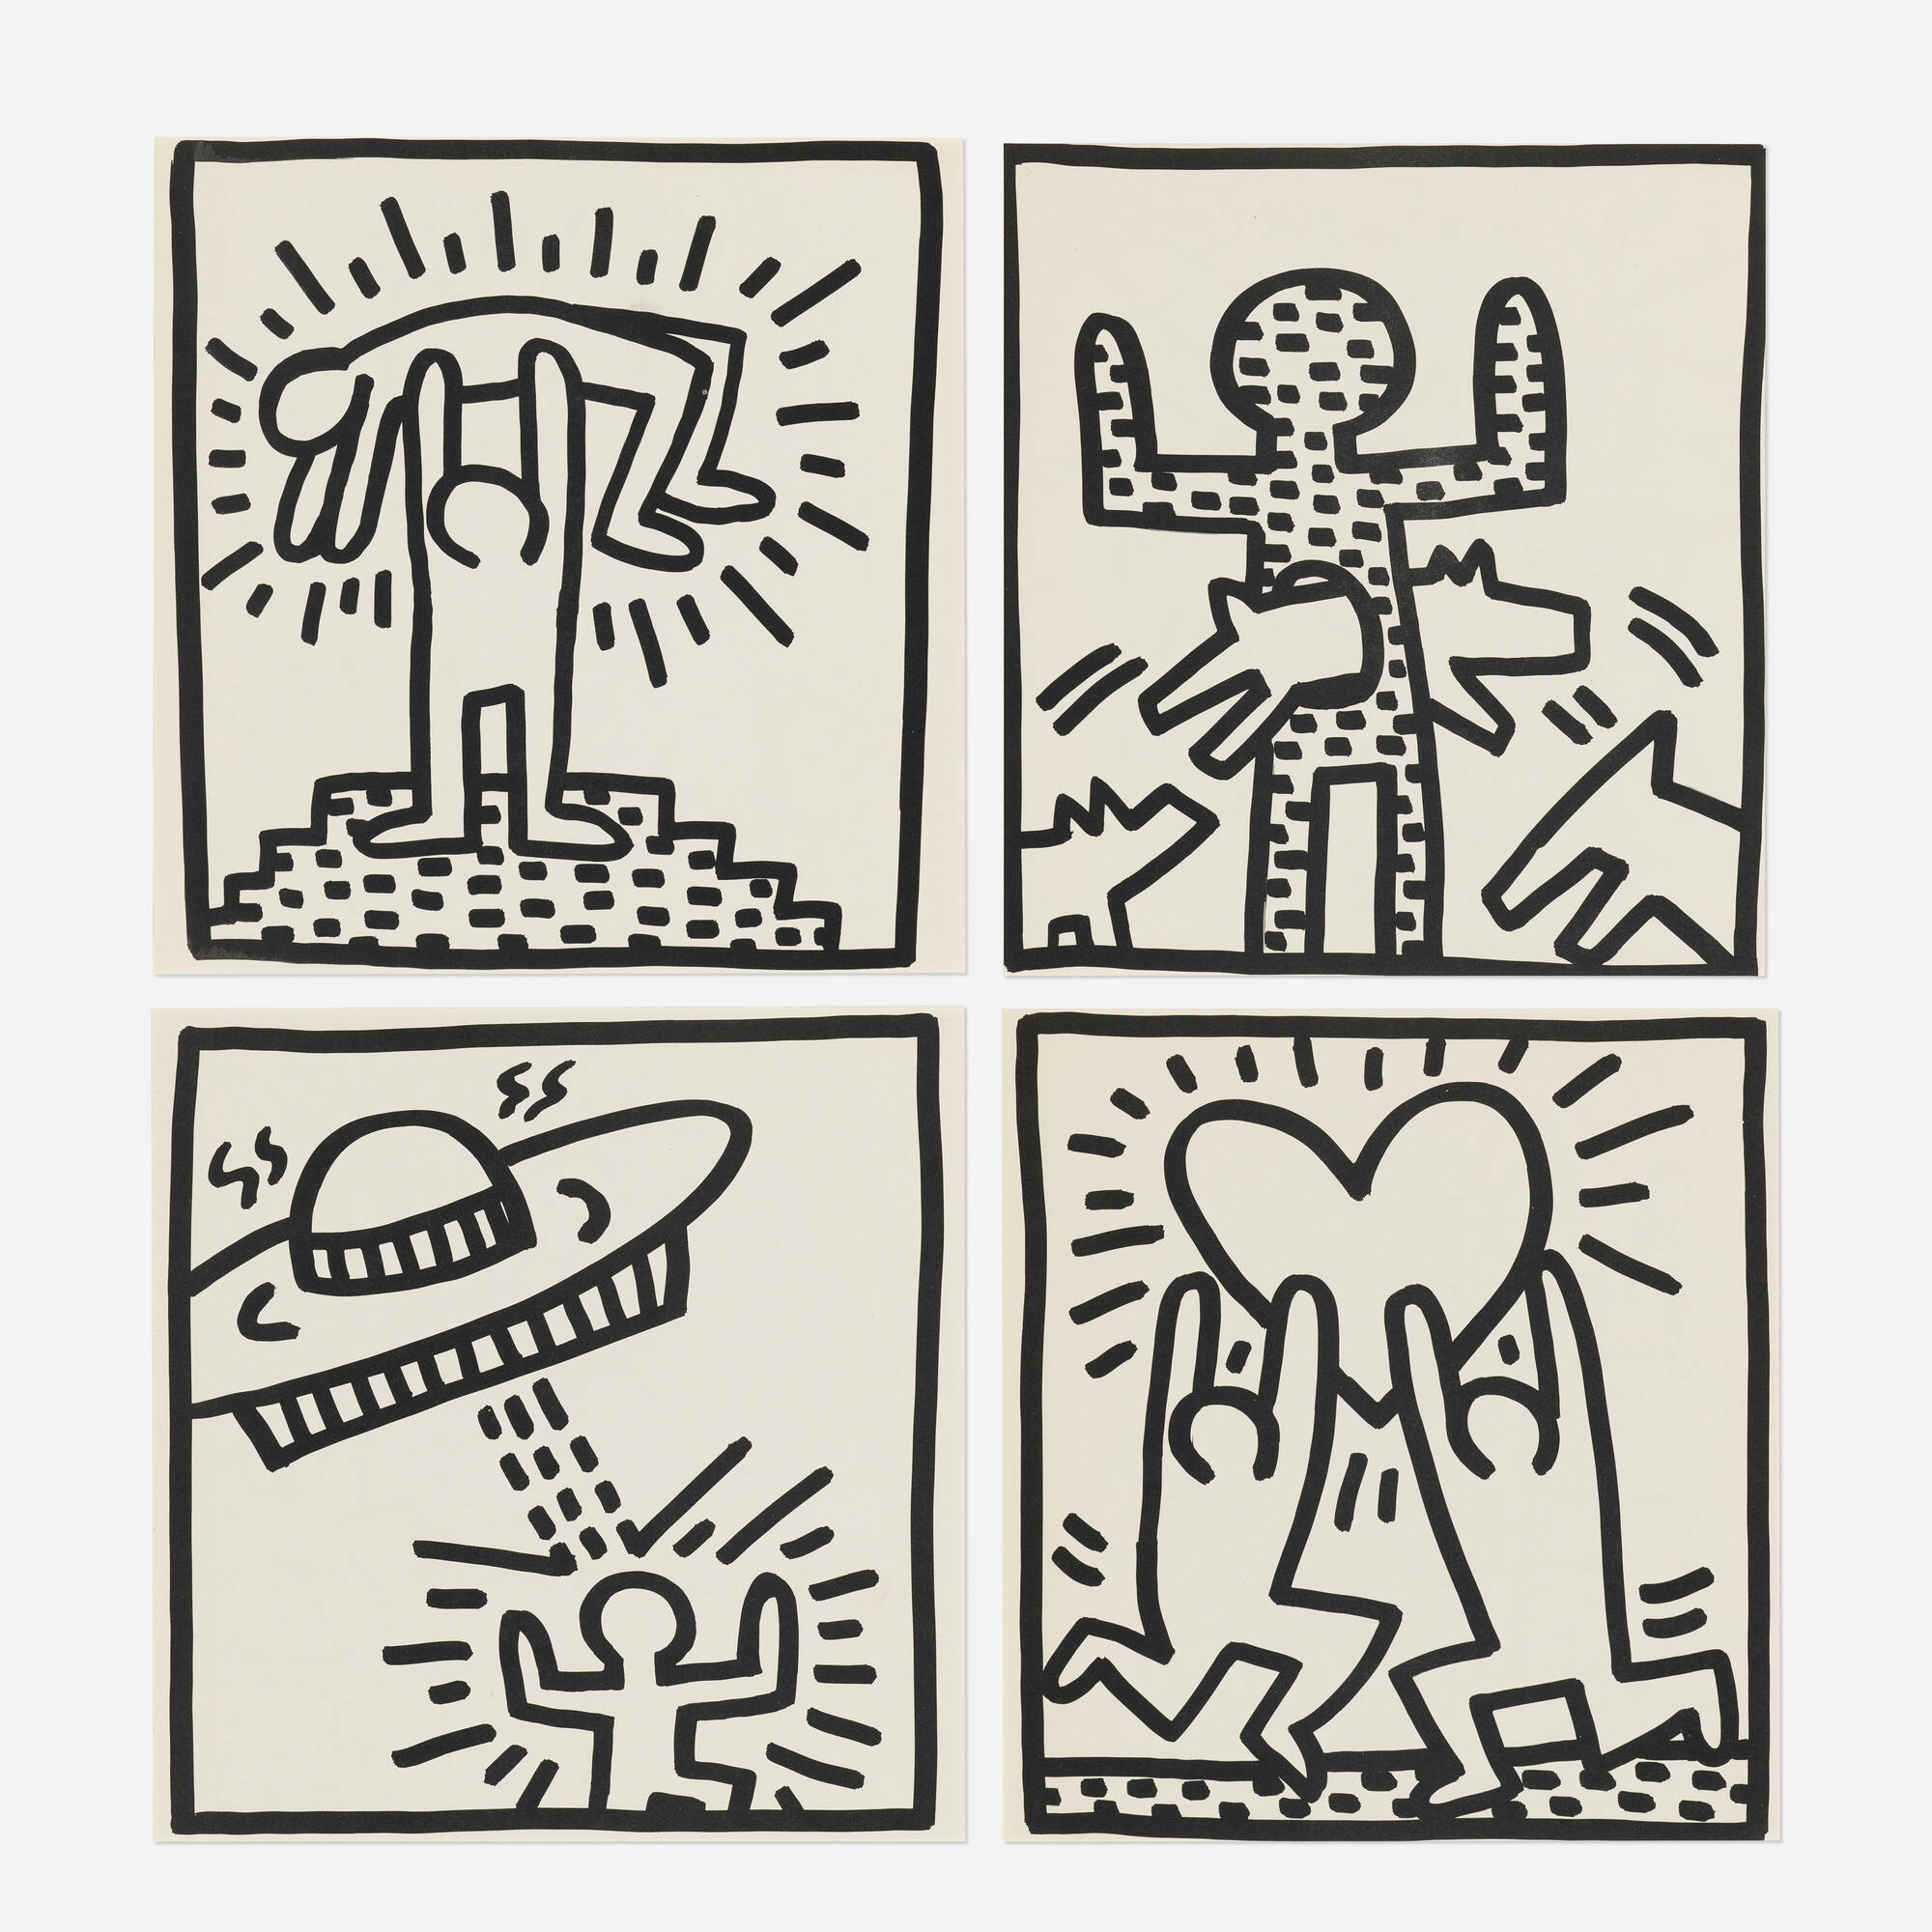 137: KEITH HARING, Untitled (four works from the Keith Haring 